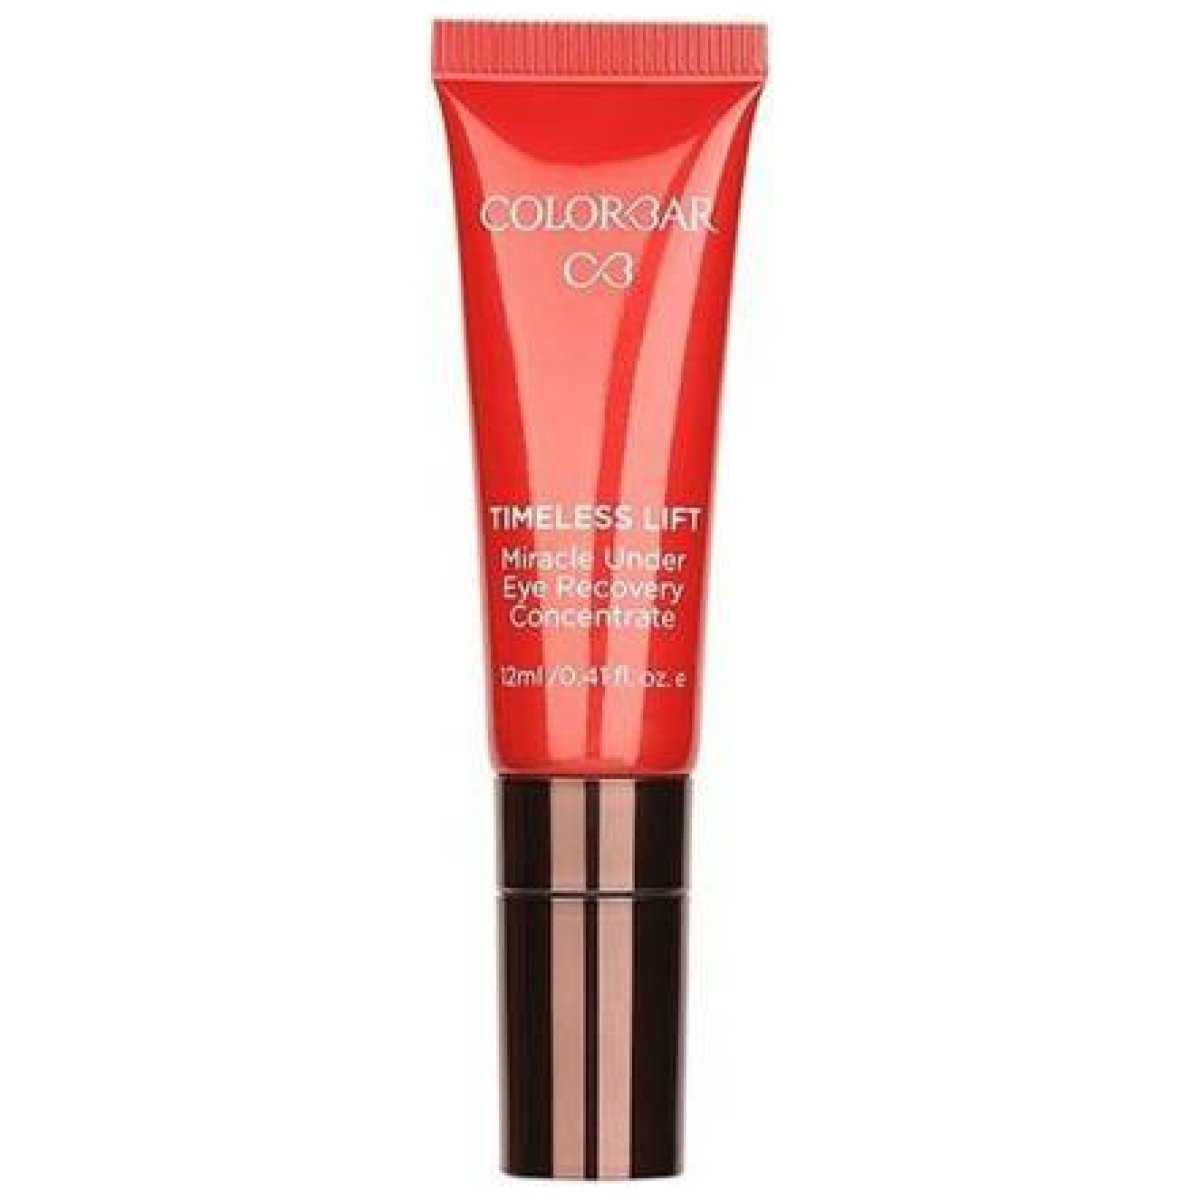 Colorbar Timeless Lift Miracle Under-Eye Recovery 12ml